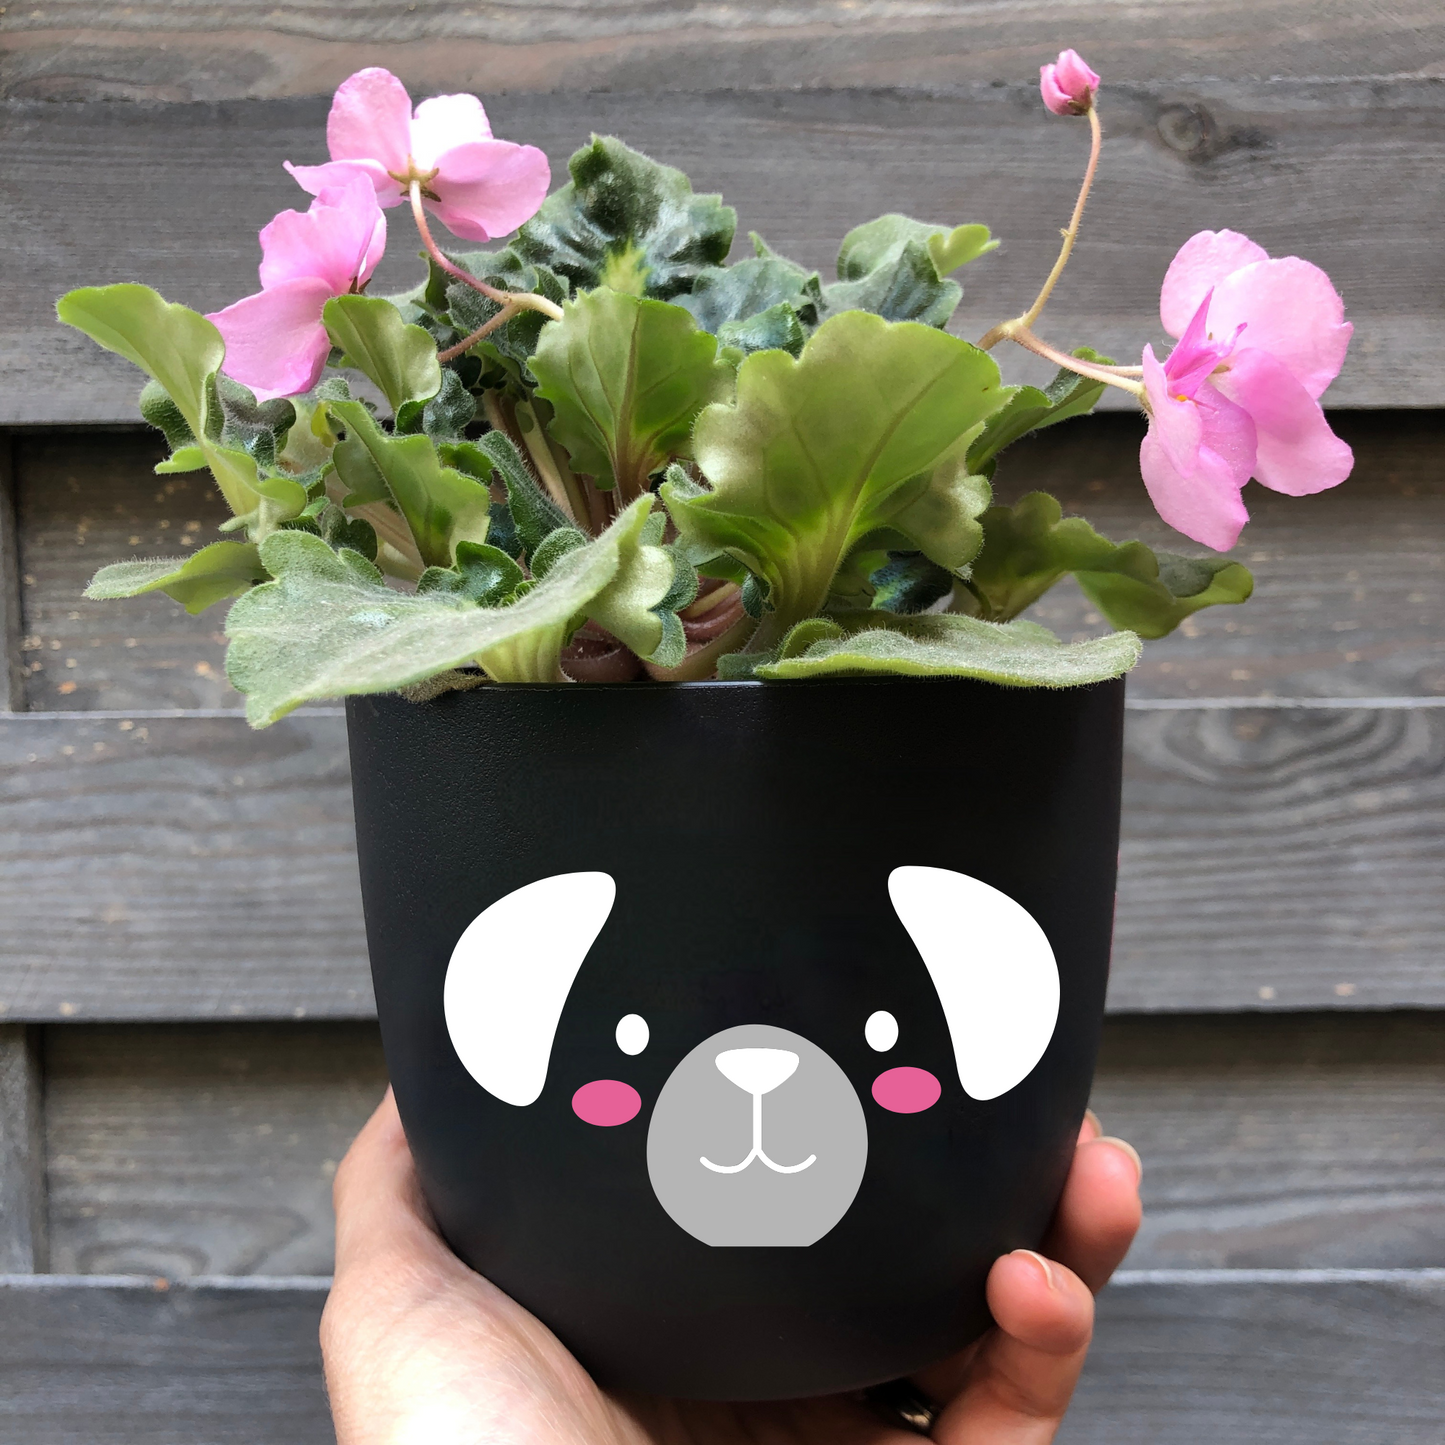 Flower pot cute animal face - gift idea child - planter animal face - happy plant pot children's room - decoration child personalized